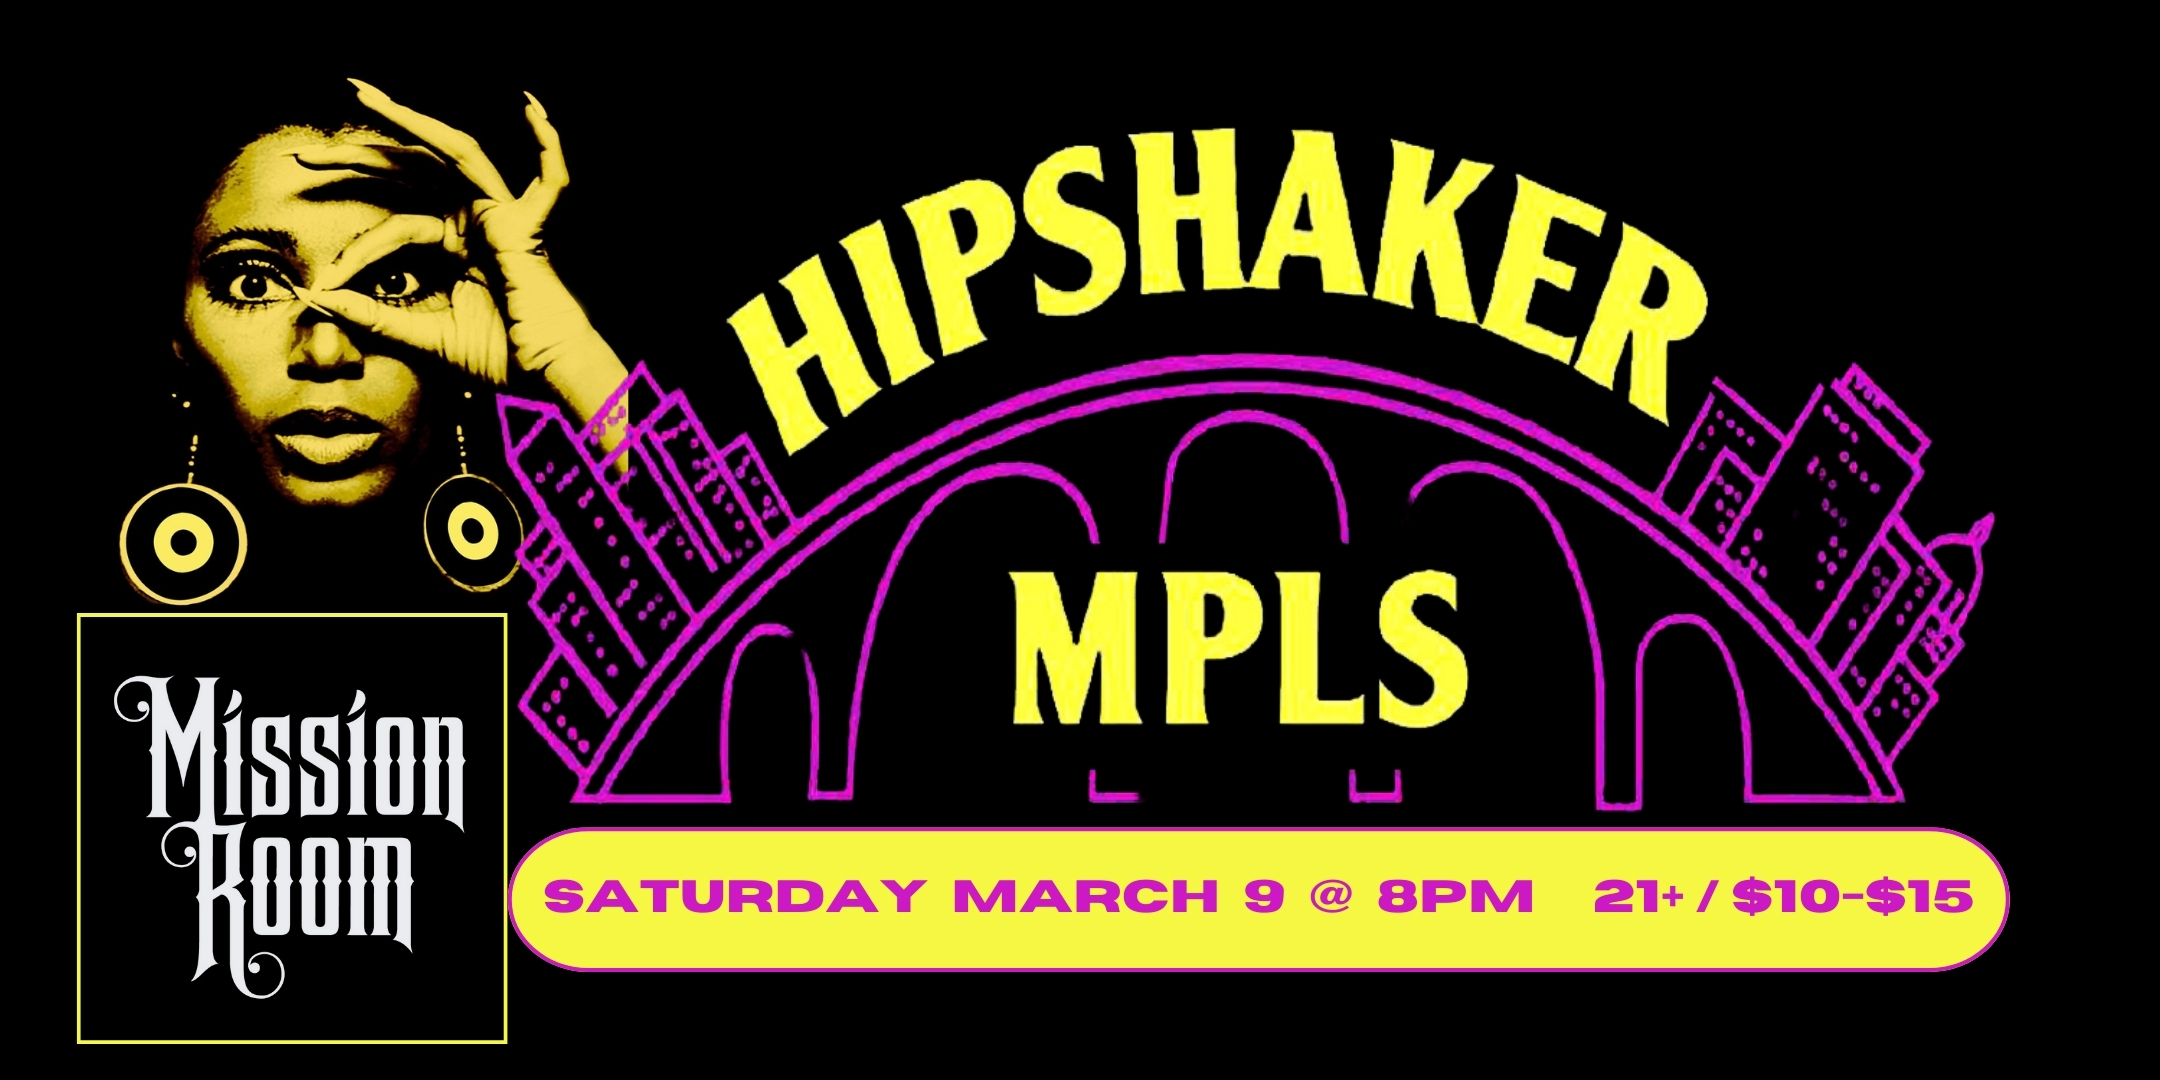 Hipshaker MPLS Heavy Funk & Rare Soul Dance Party Original Vinyl 45s! DJs Brian Engel, Greg Waletski, George Rodriguez Saturday, March 9 The Mission Room at The Hook Doors 8:00pm :: Music 8:00pm :: 21+ GA $10 ADV / $15 DOS NO REFUNDS